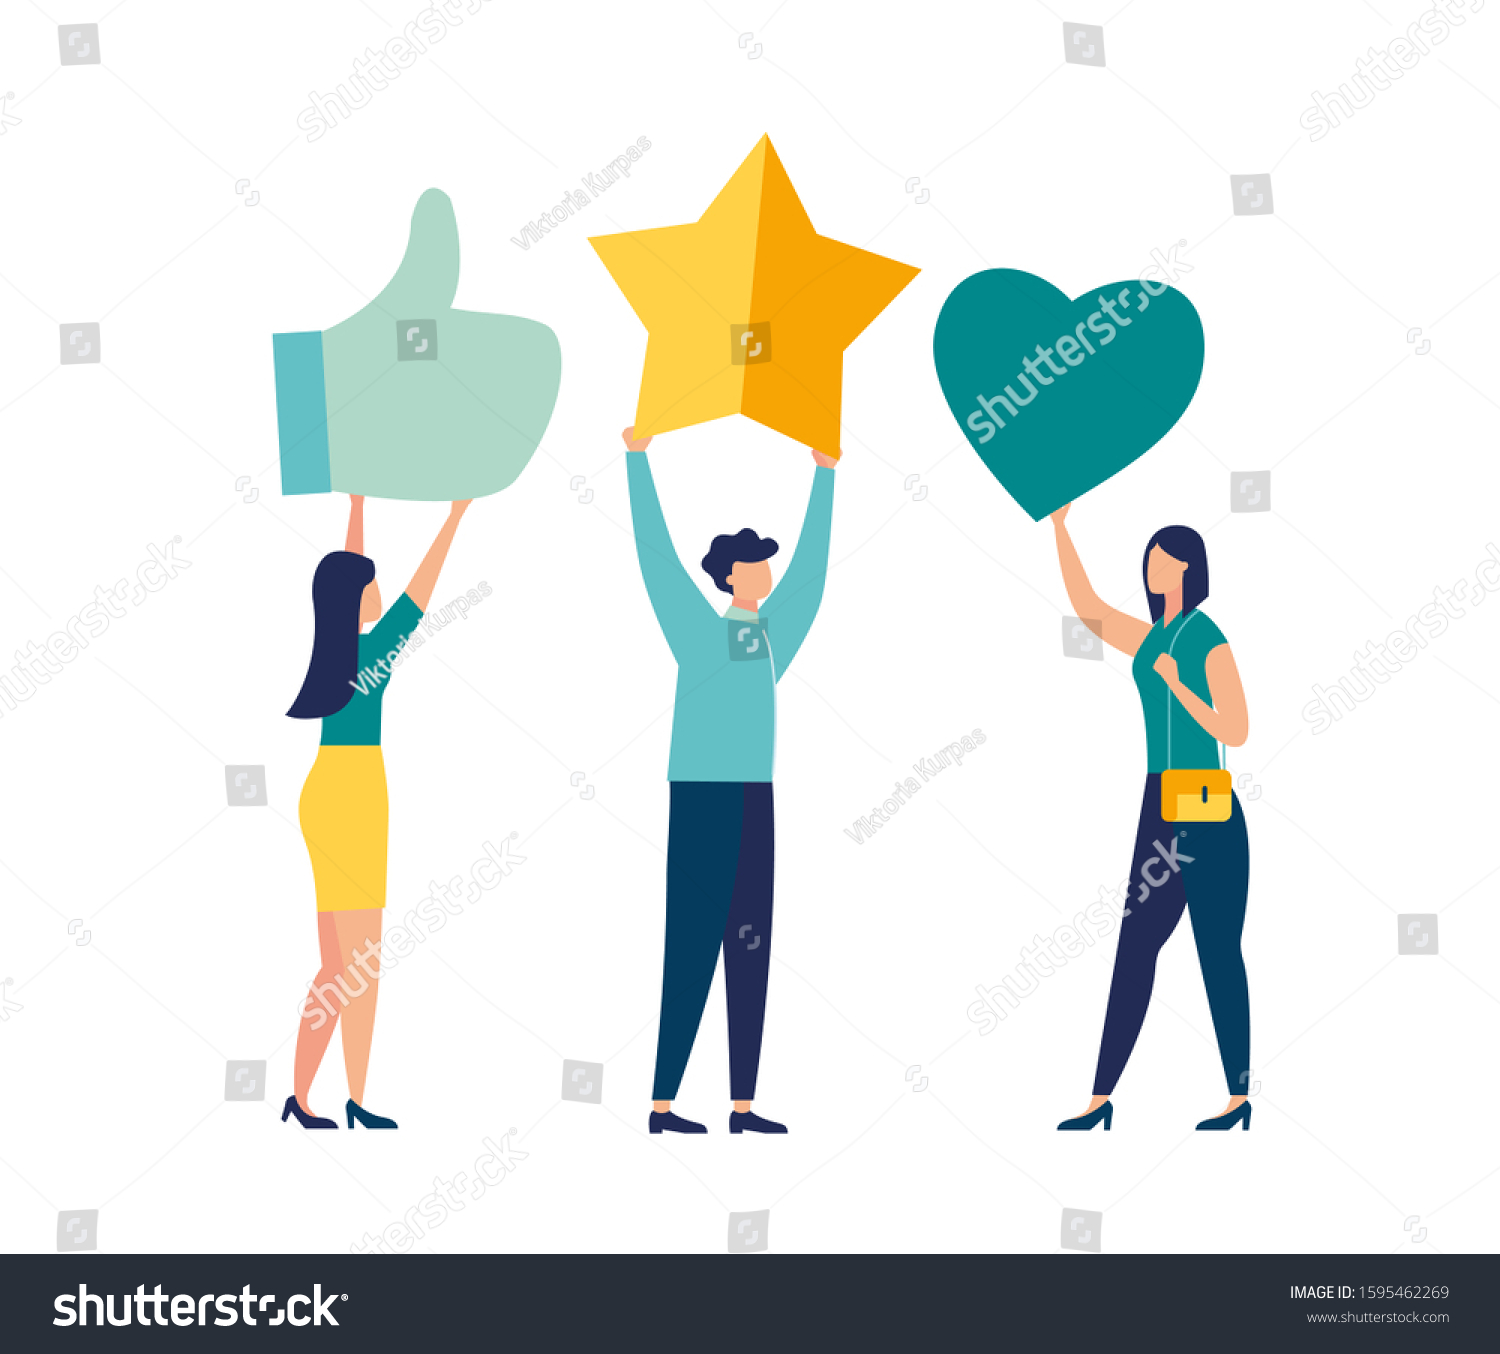 SVG of vector illustration, best performance, highest rating, vote, score five points. people leave feedback and comments that successful work is the highest score svg